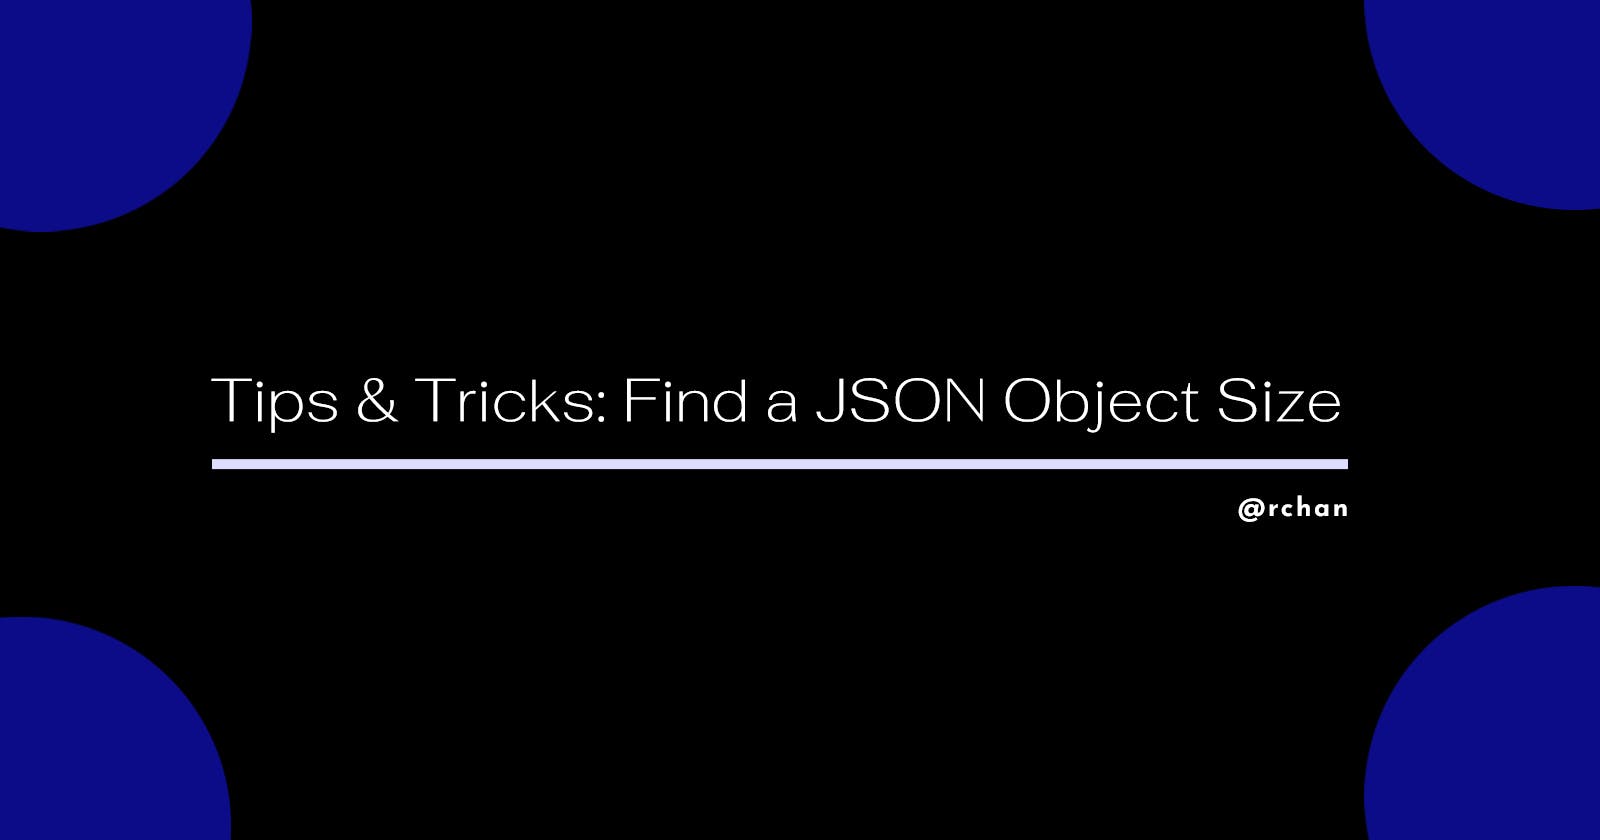 Tips & Tricks: How to find a JSON object size in Python?